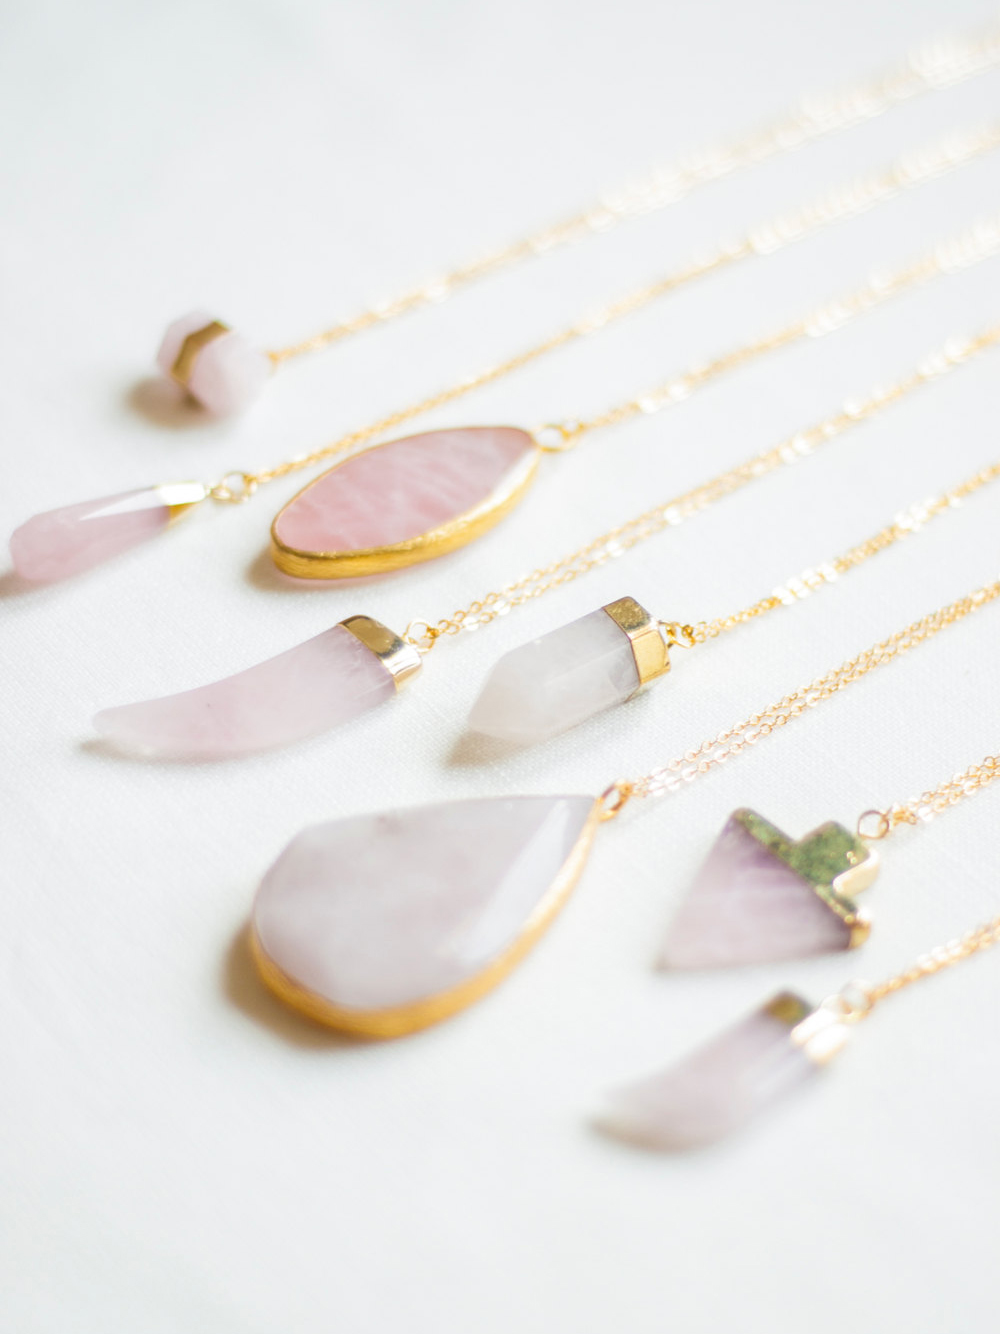 Check out these boho stone necklaces from Oliki on Etsy!